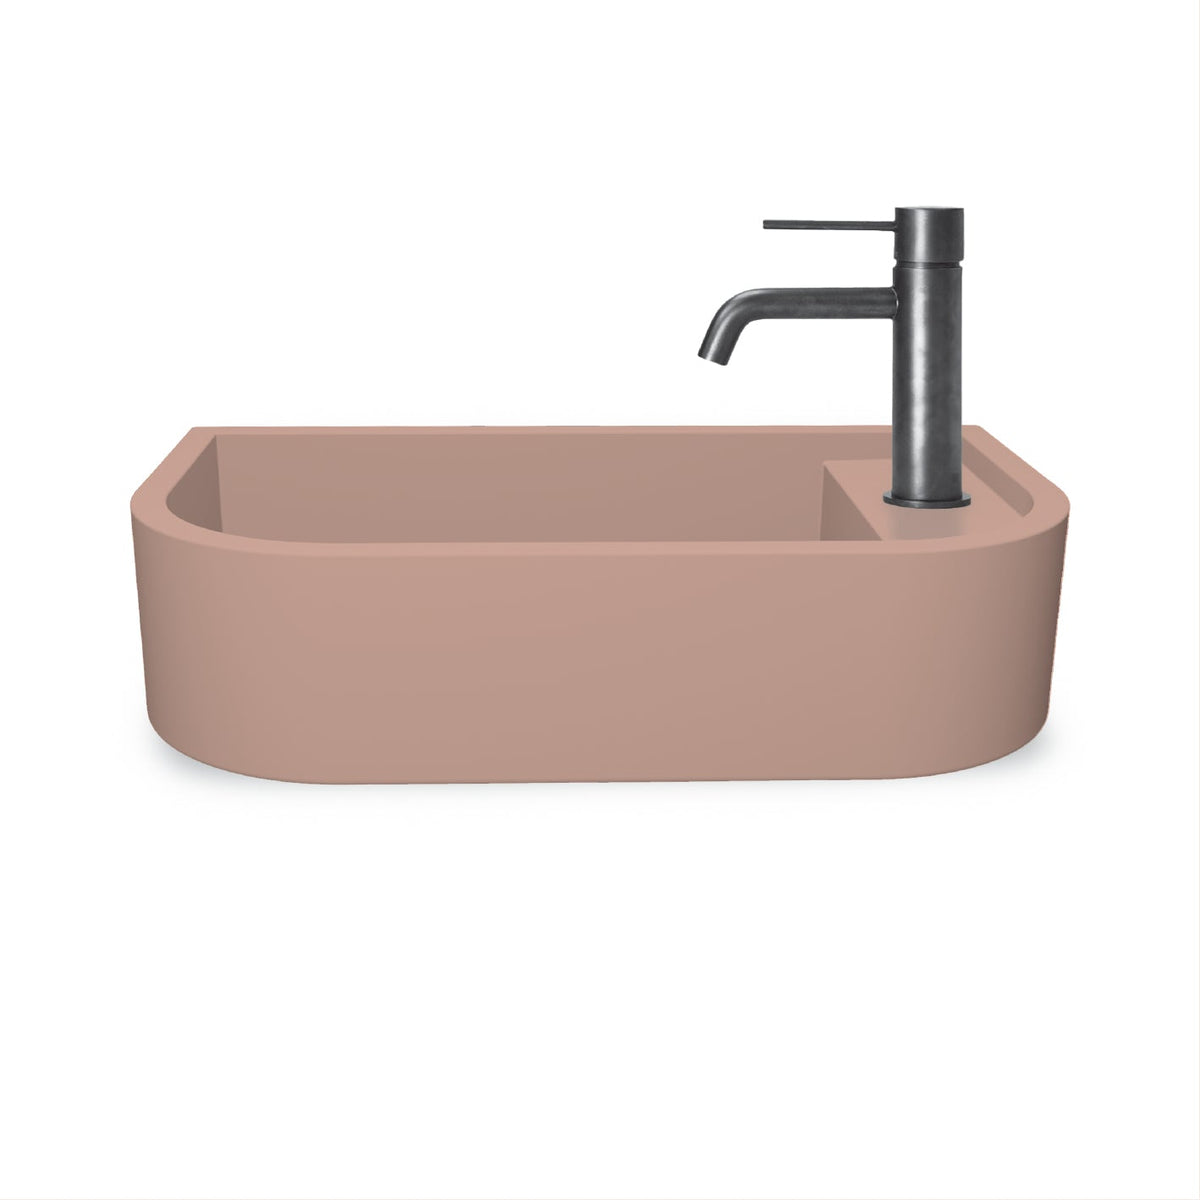 Loop 02 Basin - Overflow - Wall Hung (Blush Pink,Tap Hole,White)